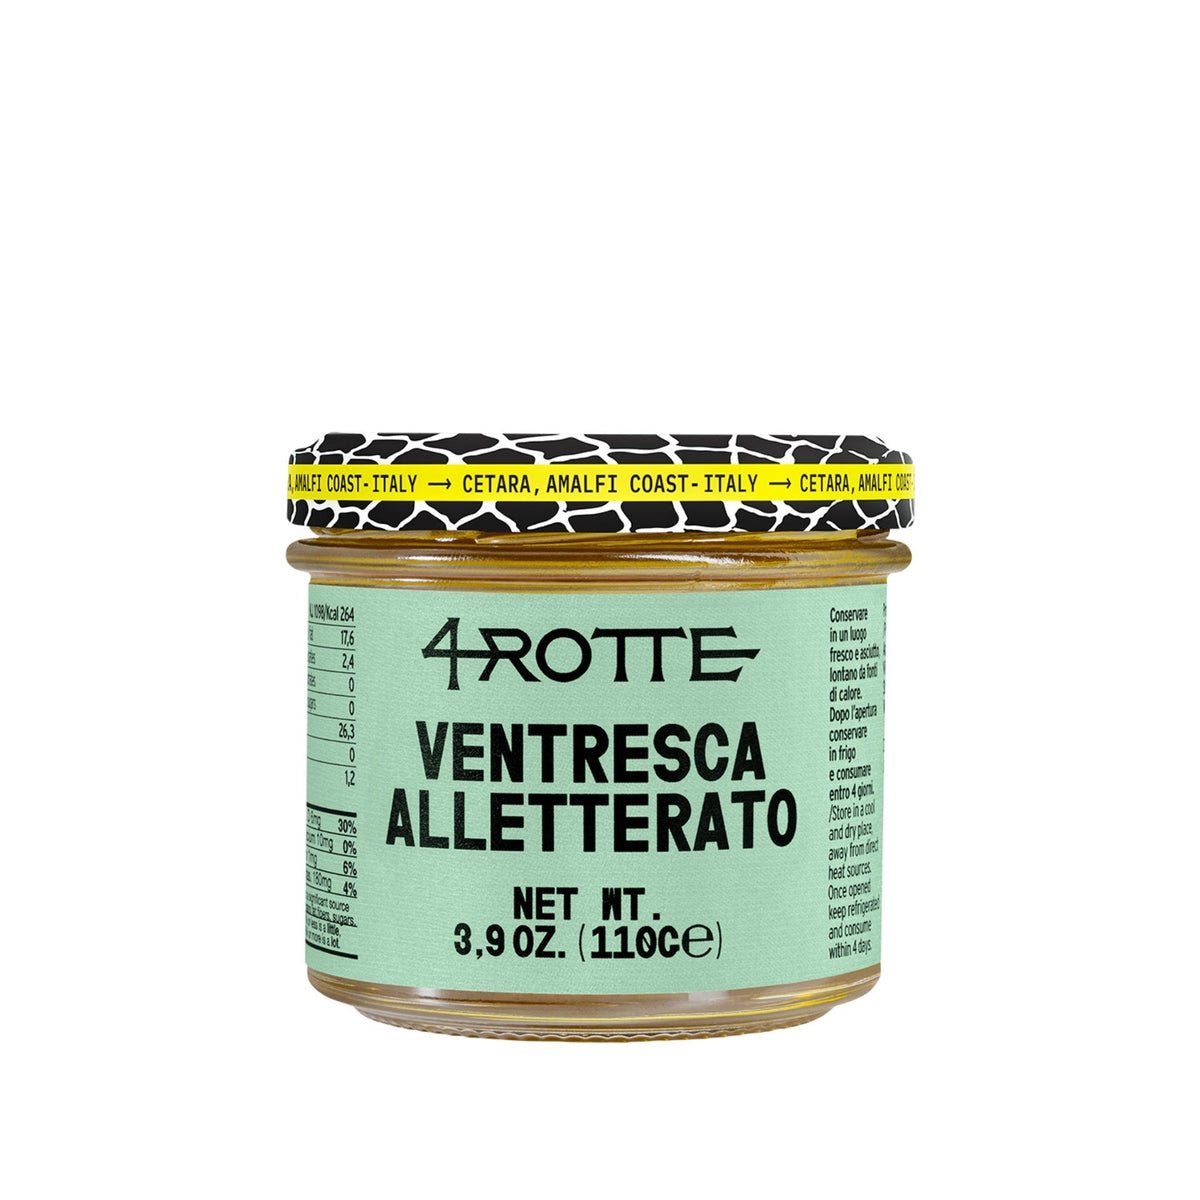 Armatore 4 Rotte Little Tunny Tuna Belly in Olive Oil 110g  | Imported and distributed in the UK by Just Gourmet Foods